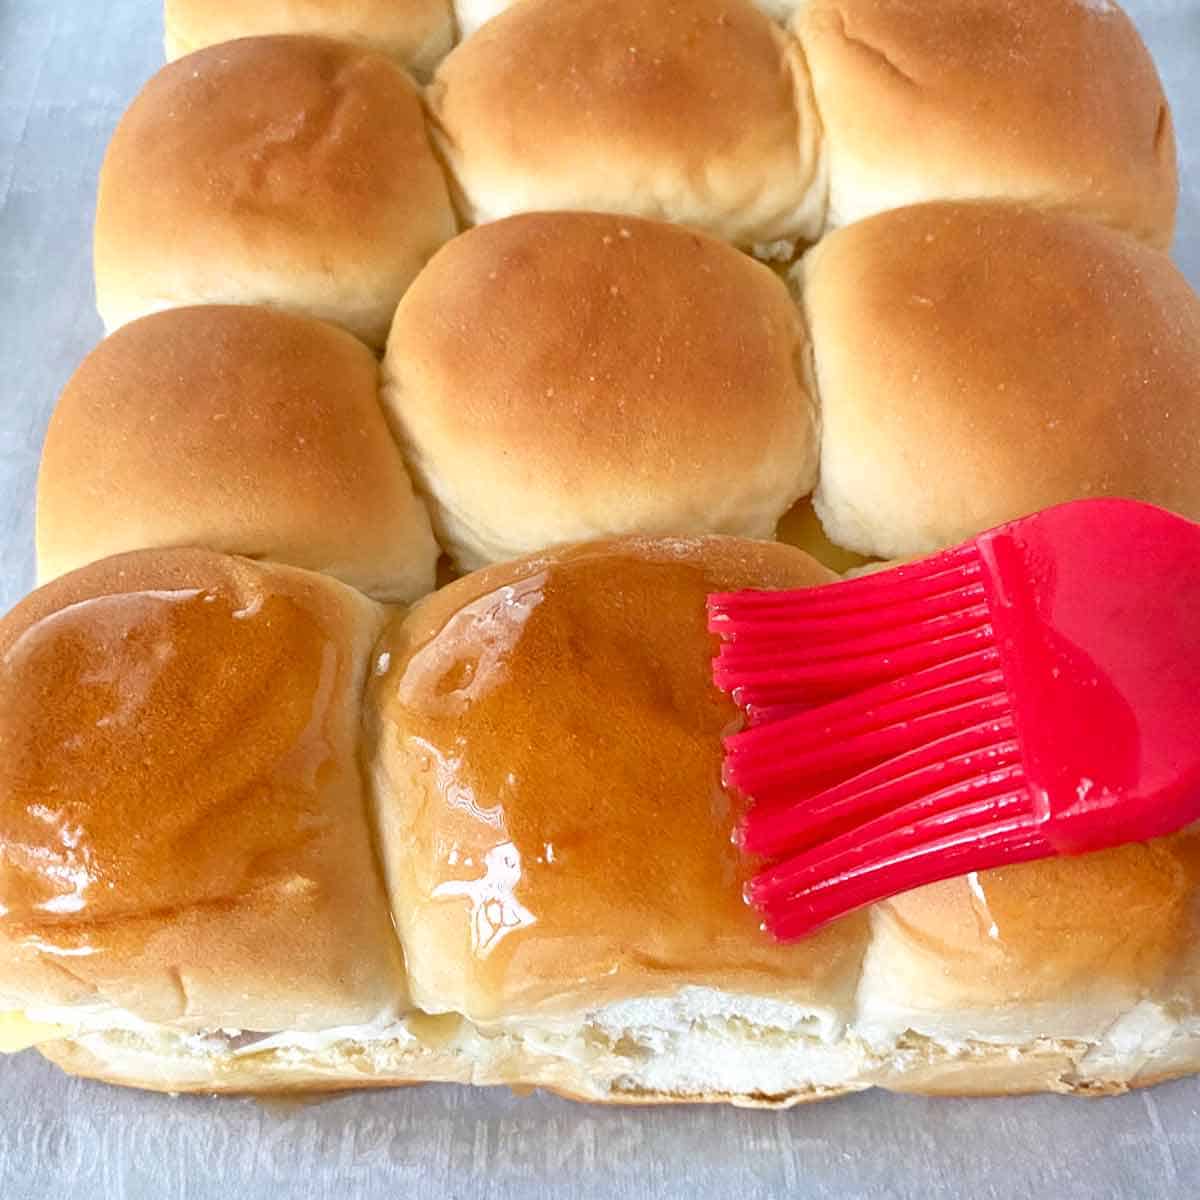 Brushing Hawaiian rolls with the butter Worcestershire mixture.